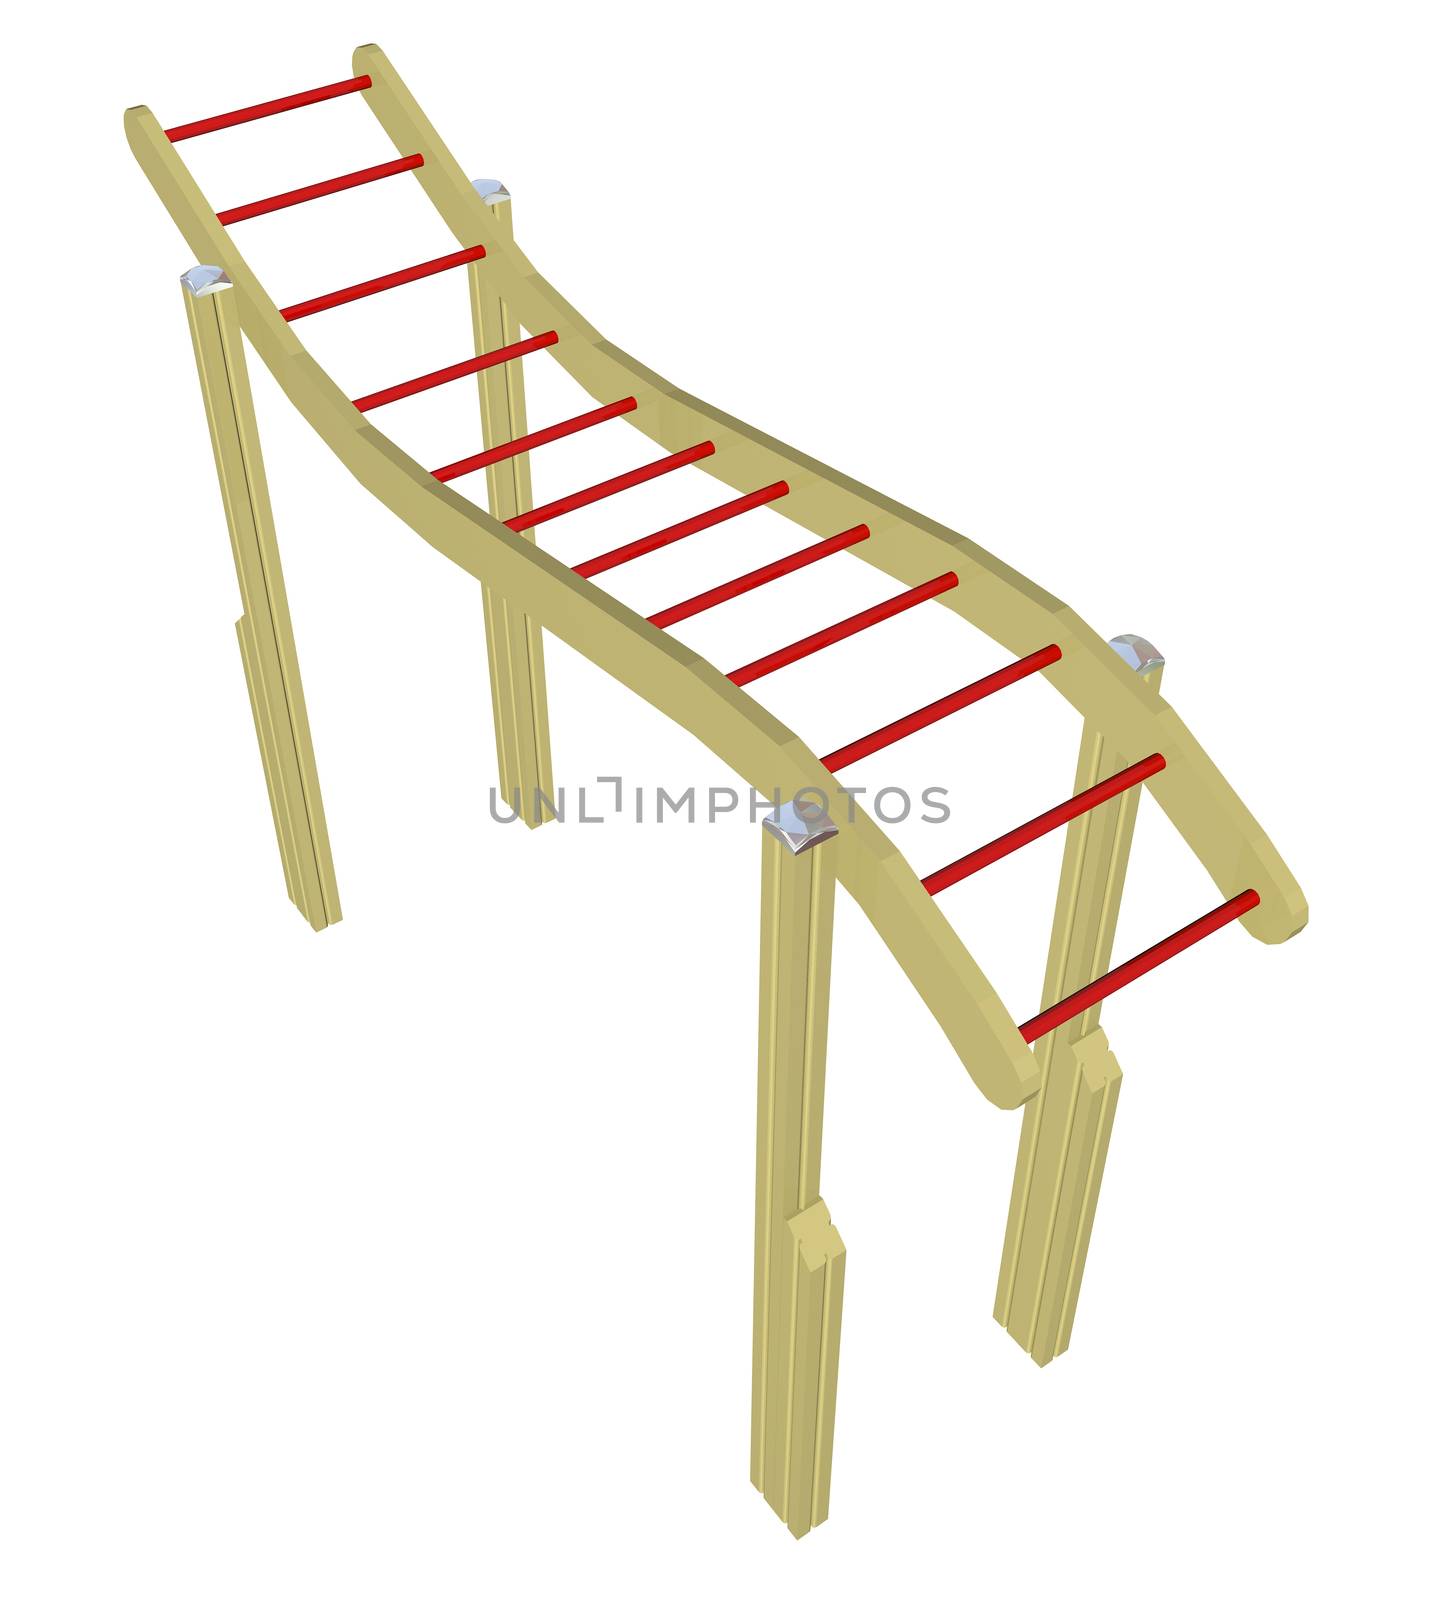 Monkey bars, red and yellow, 3D illustration, isolated against a white background.